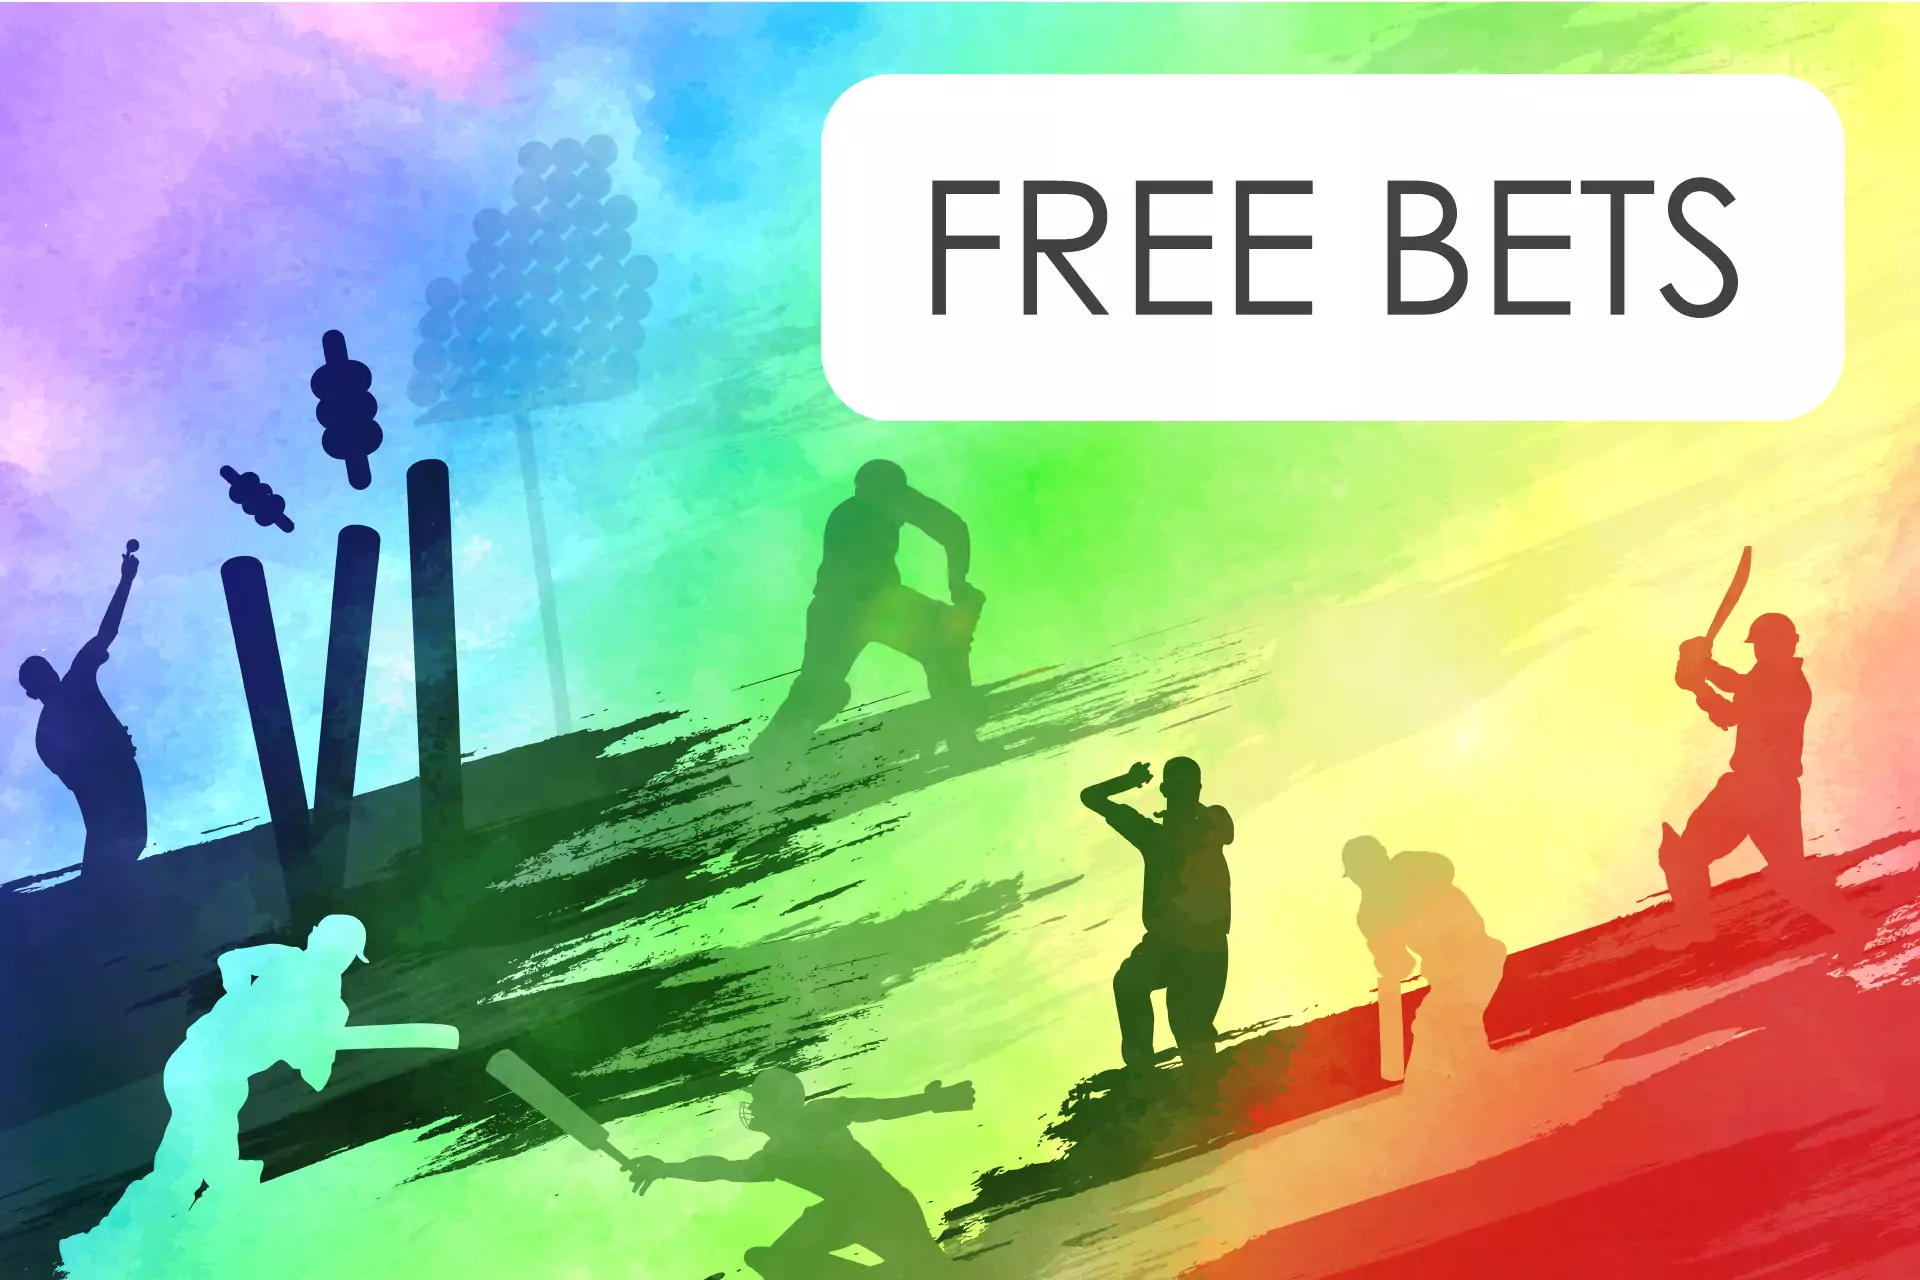 Free bets are one type of bonus in cricket betting in India.